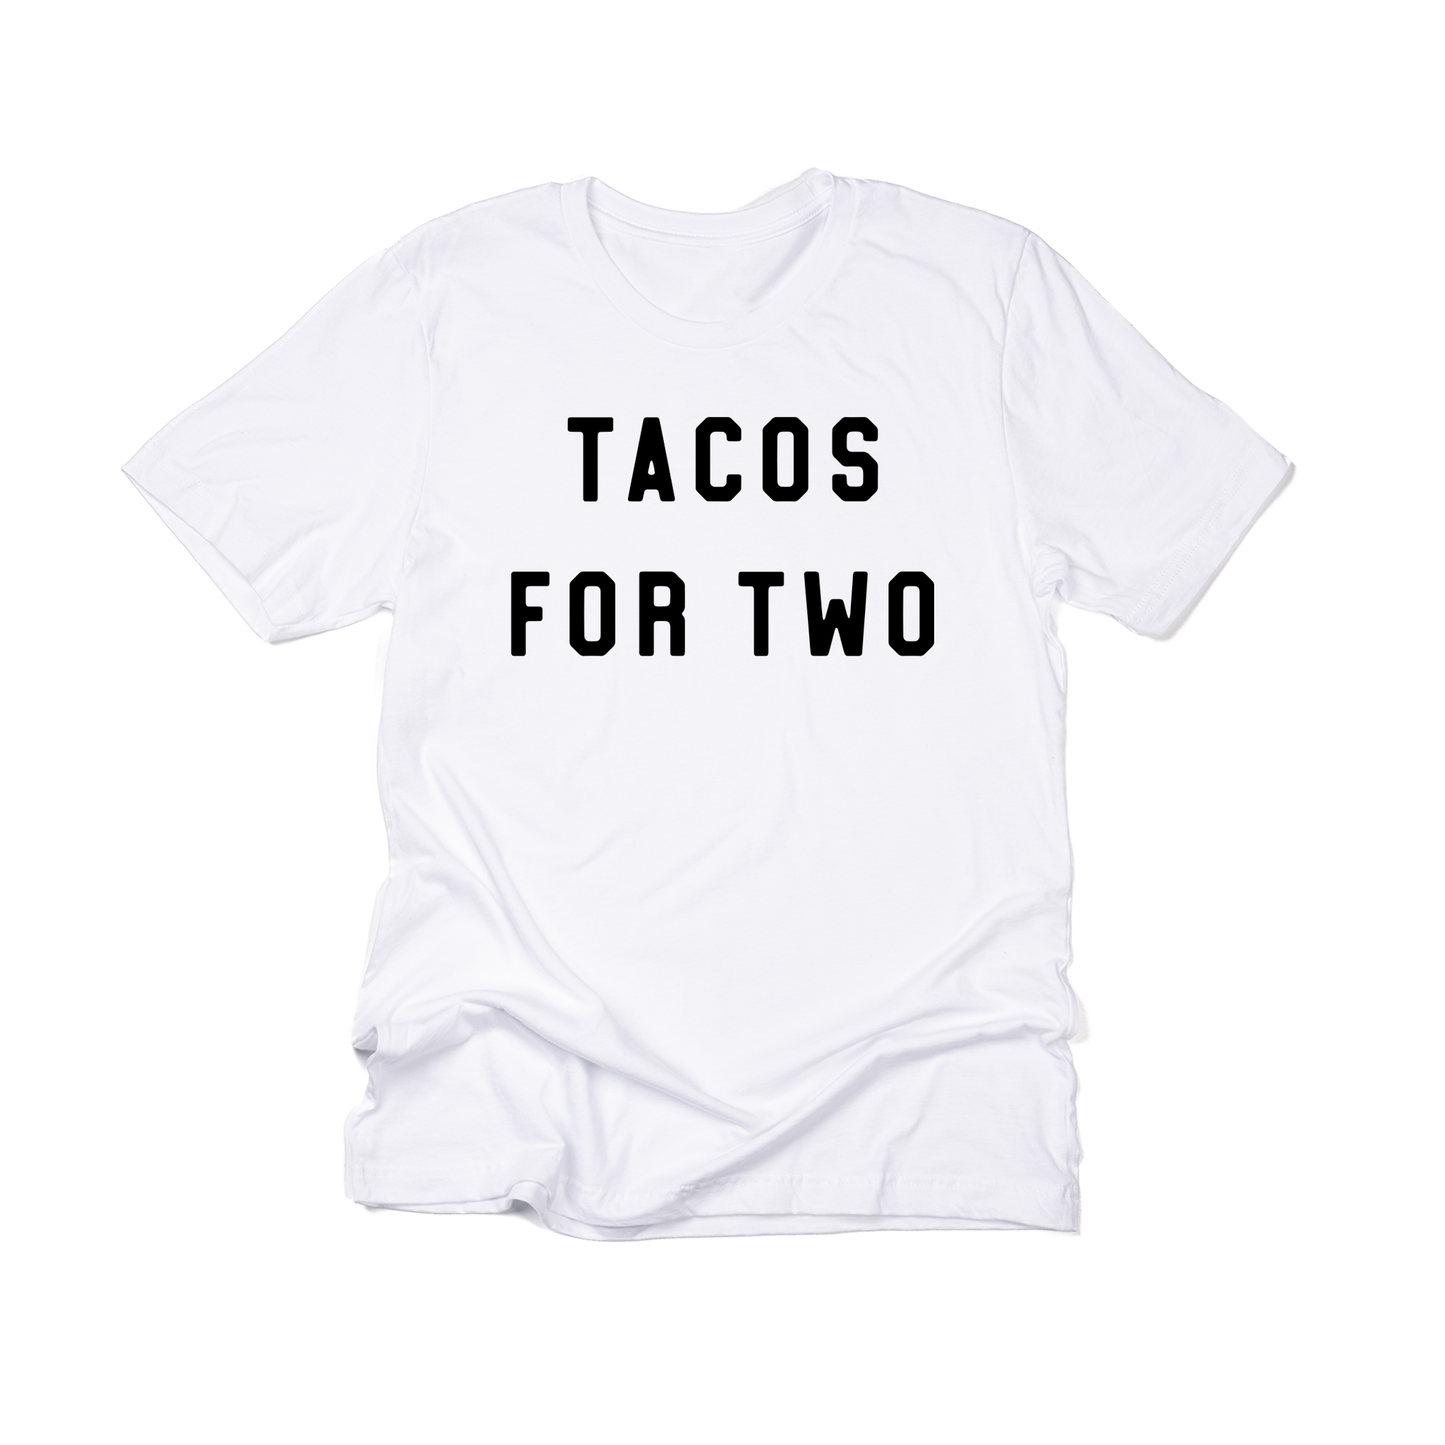 Tacos For Two (Black) - Tee (White)